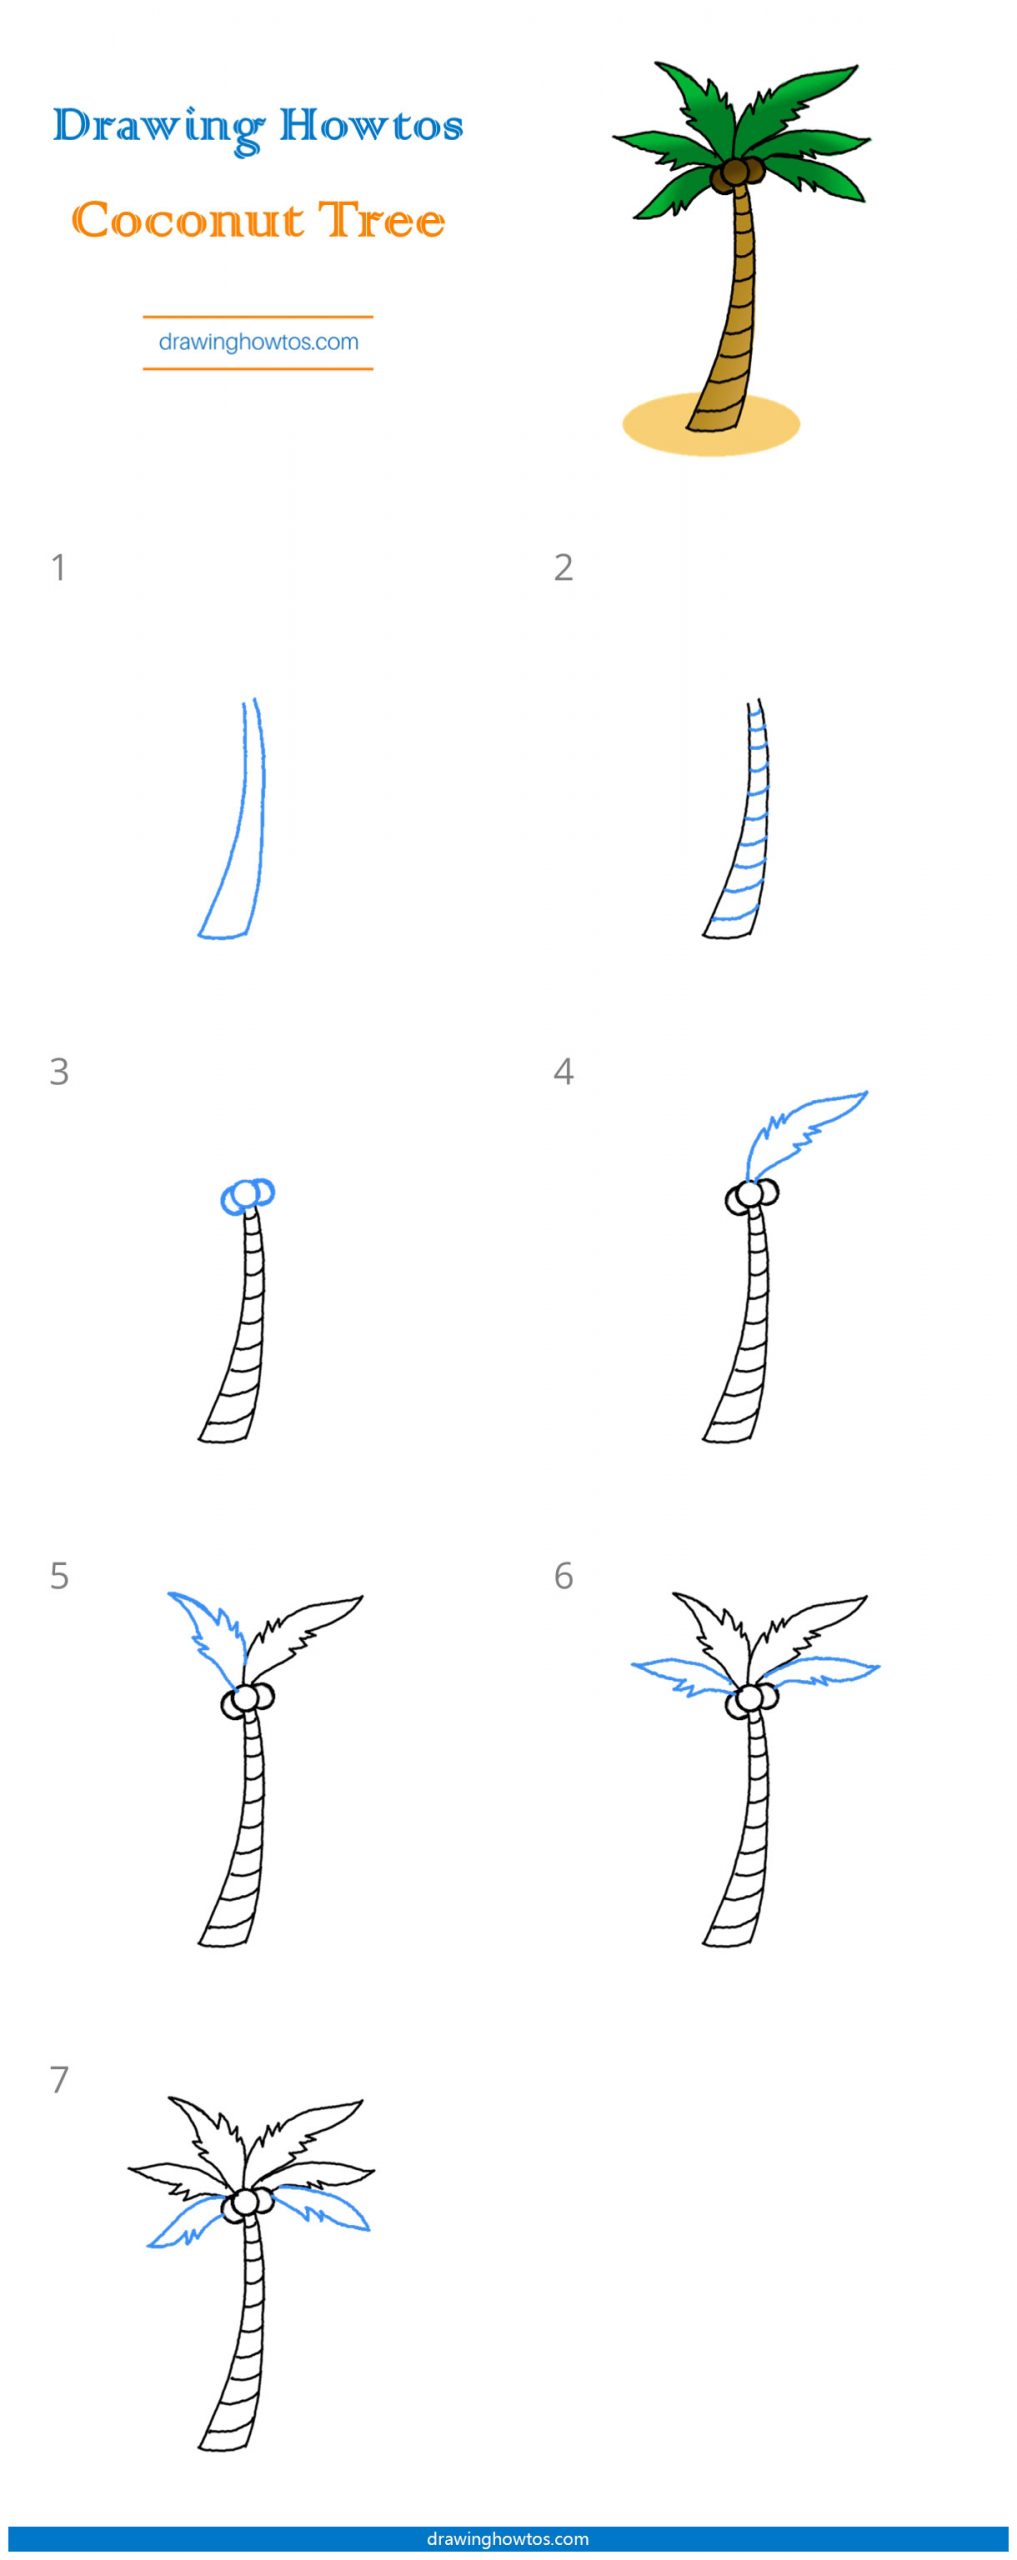 How to Draw a Coconut Tree Step by Step